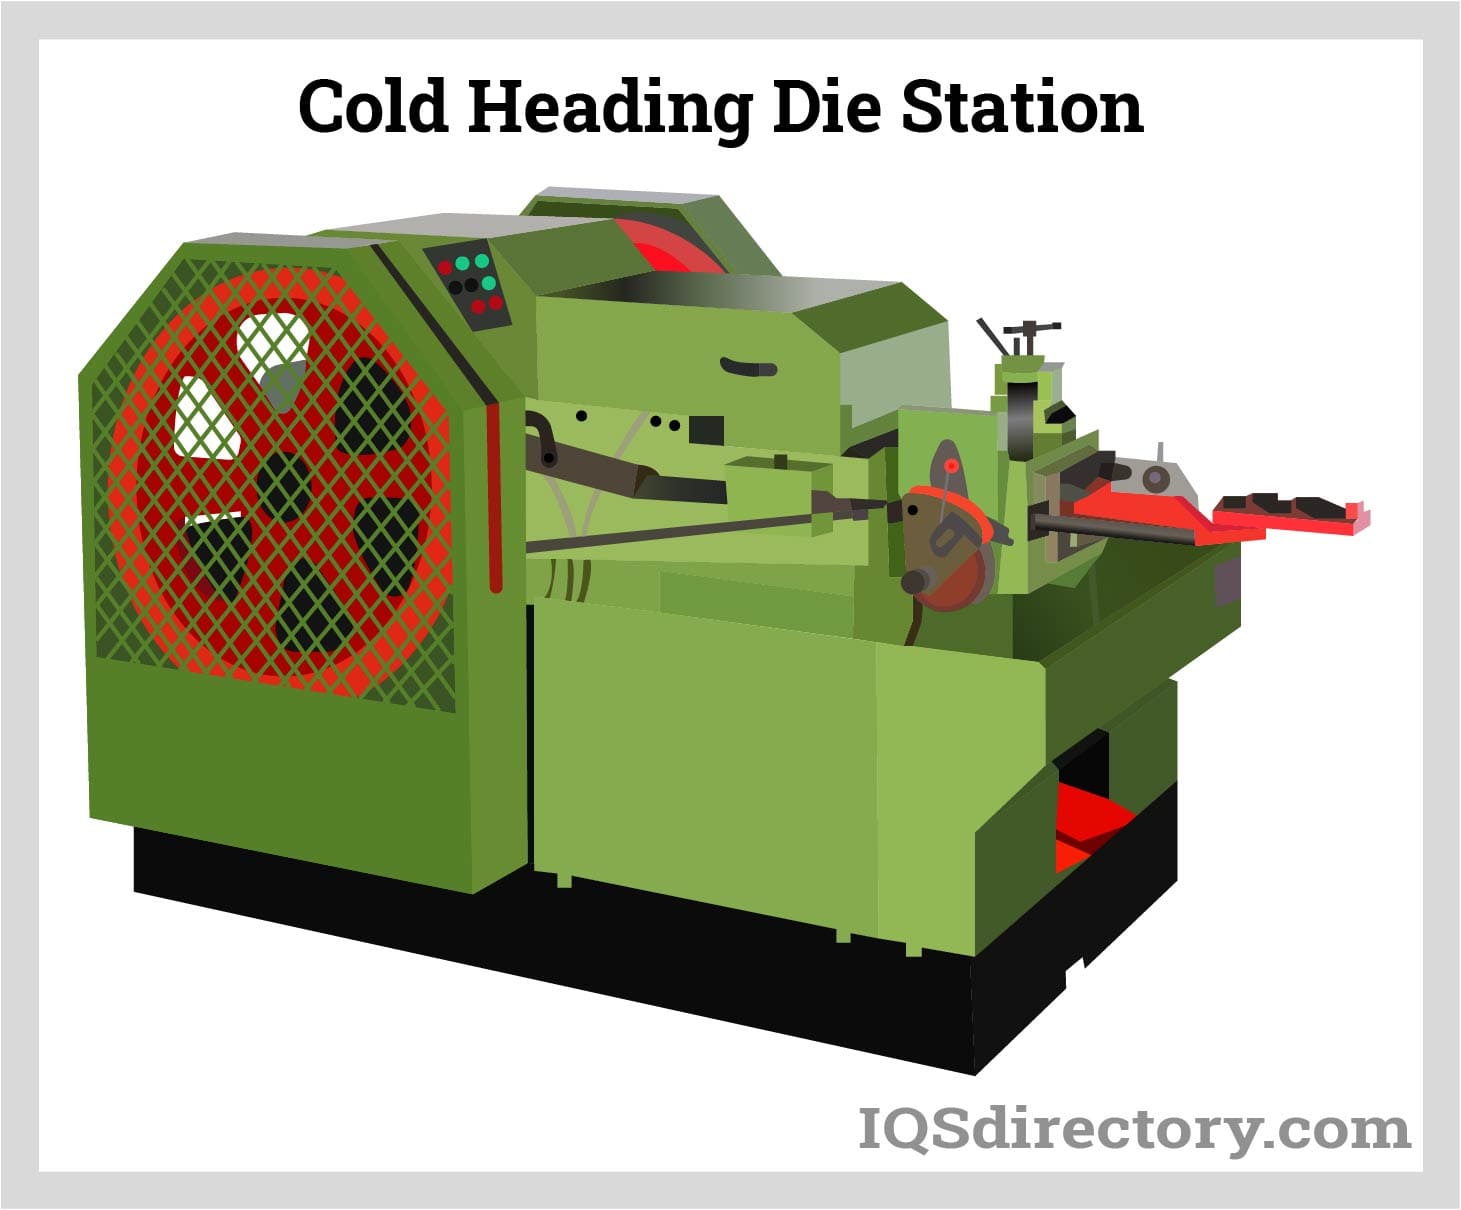 Cold Heading Die Station